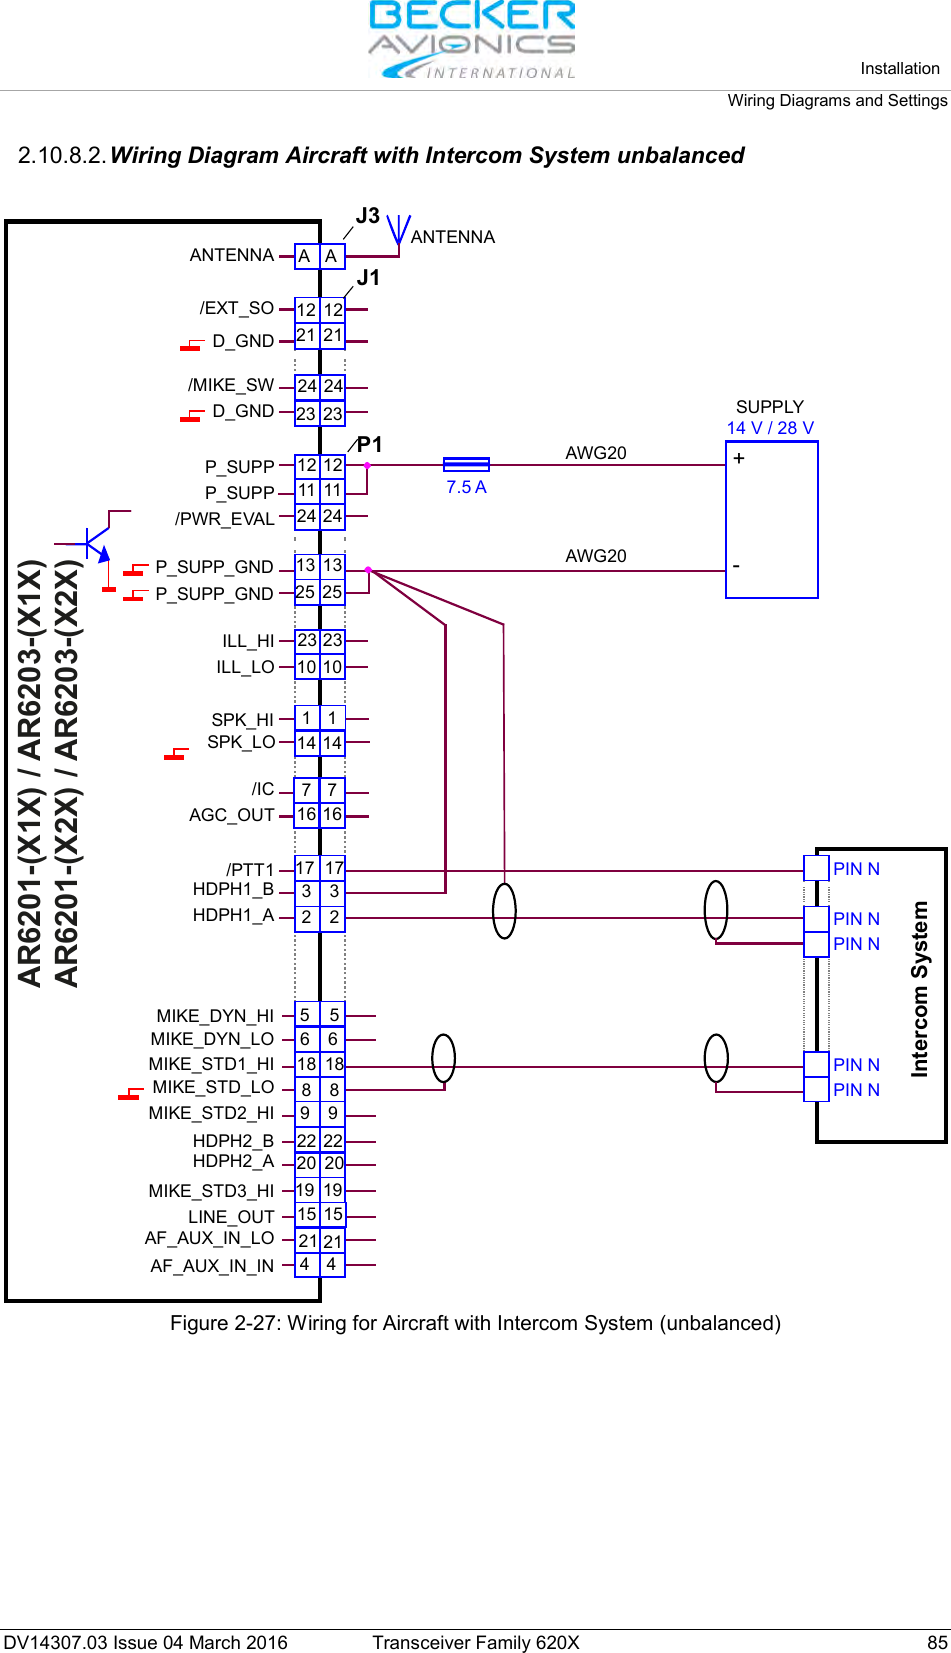   Installation Wiring Diagrams and Settings  DV14307.03 Issue 04 March 2016 Transceiver Family 620X 85 2.10.8.2. Wiring Diagram Aircraft with Intercom System unbalanced  AR6201-(X1X) / AR6203-(X1X)AR6201-(X2X) / AR6203-(X2X)ANTENNAJ3J1P1ANTENNA/EXT_SOD_GND/MIKE_SWD_GNDHDPH1_BHDPH1_AP_SUPPP_SUPP_GNDP_SUPP_GNDILL_HIILL_LOSPK_HISPK_LO/ICAGC_OUT/PTT1P_SUPP/PWR_EVALAA23 2325 2510 101 114 147 716 1612 1221 2123 2317 1712 1211 1124 243 32 25 56 618 18889 92222202019 19151521MIKE_DYN_LOMIKE_DYN_HIMIKE_STD1_HIMIKE_STD_LOMIKE_STD2_HIMIKE_STD3_HILINE_OUTAF_AUX_IN_LOAF_AUX_IN_INHDPH2_BHDPH2_A2144131324 24+-SUPPLY14 V / 28 VIntercom SystemAWG207.5 AAWG20PIN NPIN NPIN NPIN NPIN N Figure 2-27: Wiring for Aircraft with Intercom System (unbalanced)  